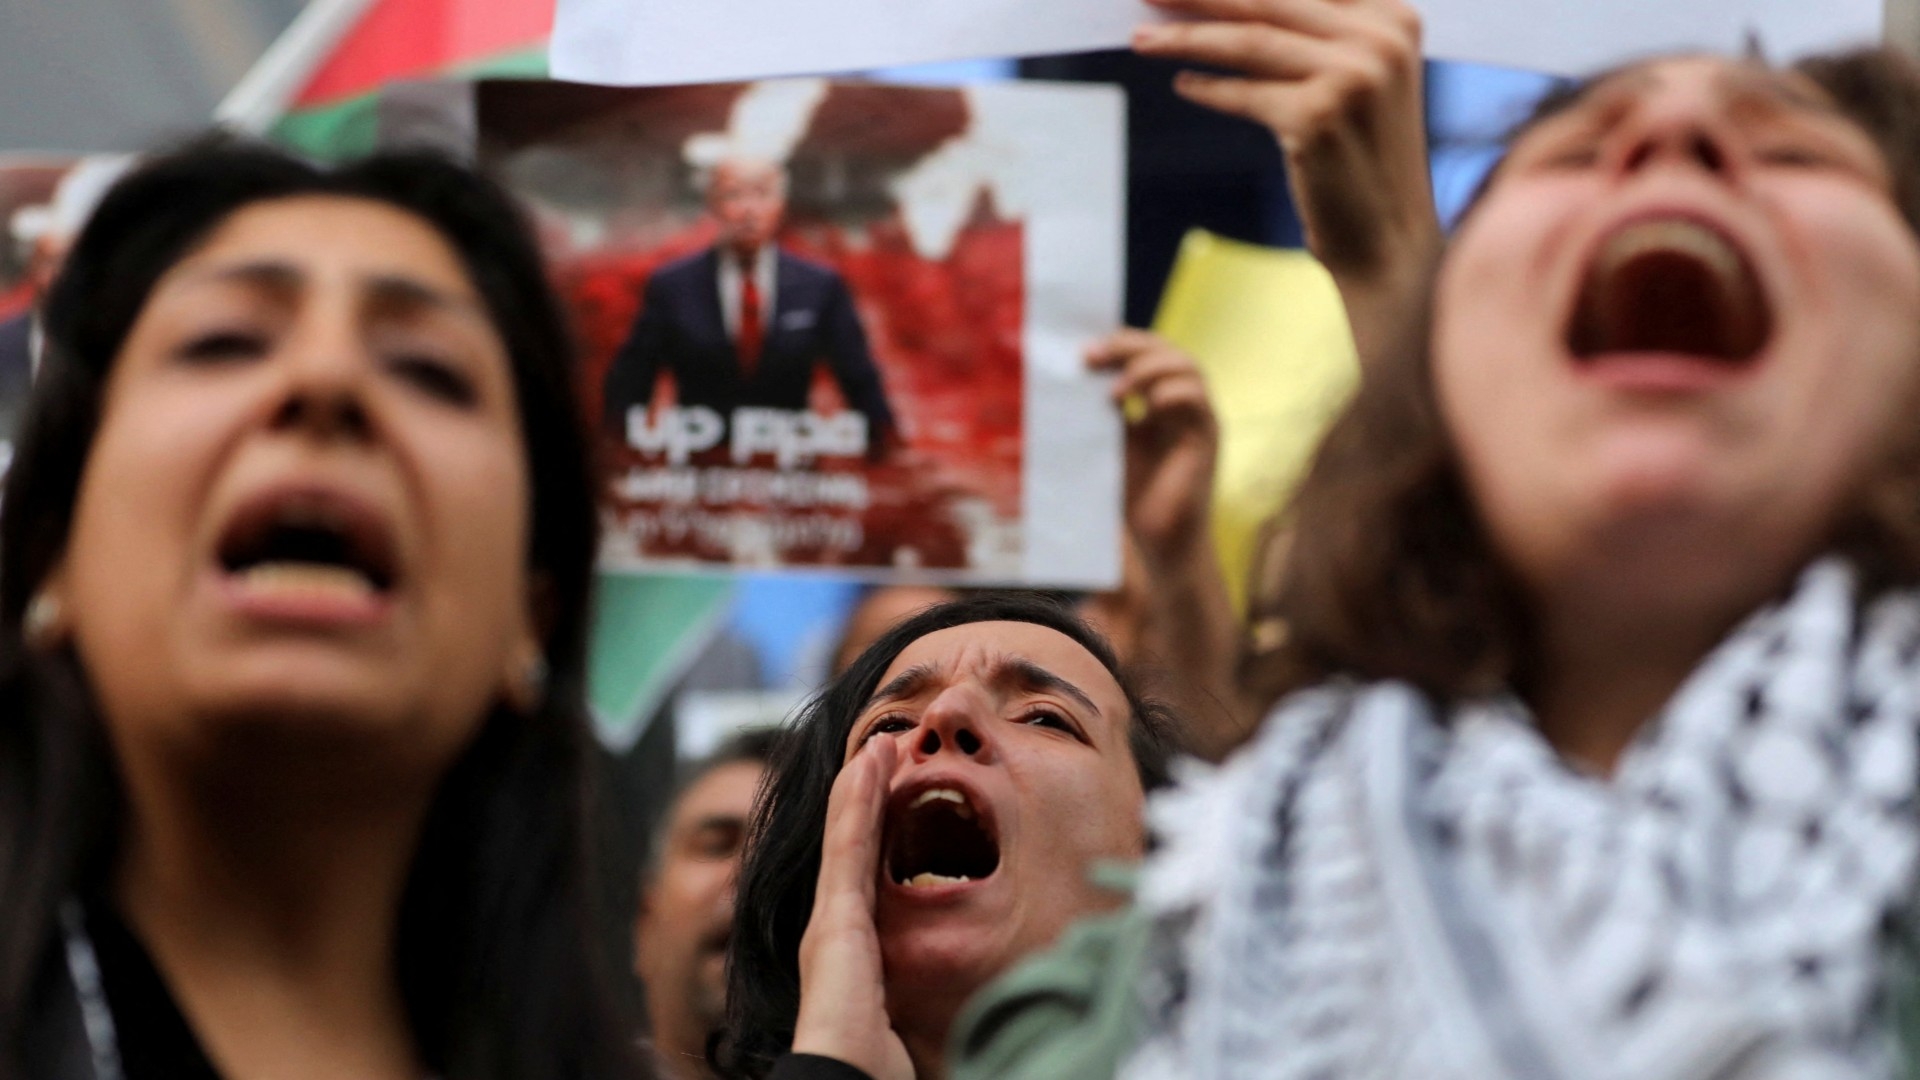 Reuters: Women protest in support of Palestinians, amid the ongoing conflict between Israel and Gaza, in front of the Egypt Journalists Syndicate, in Cairo